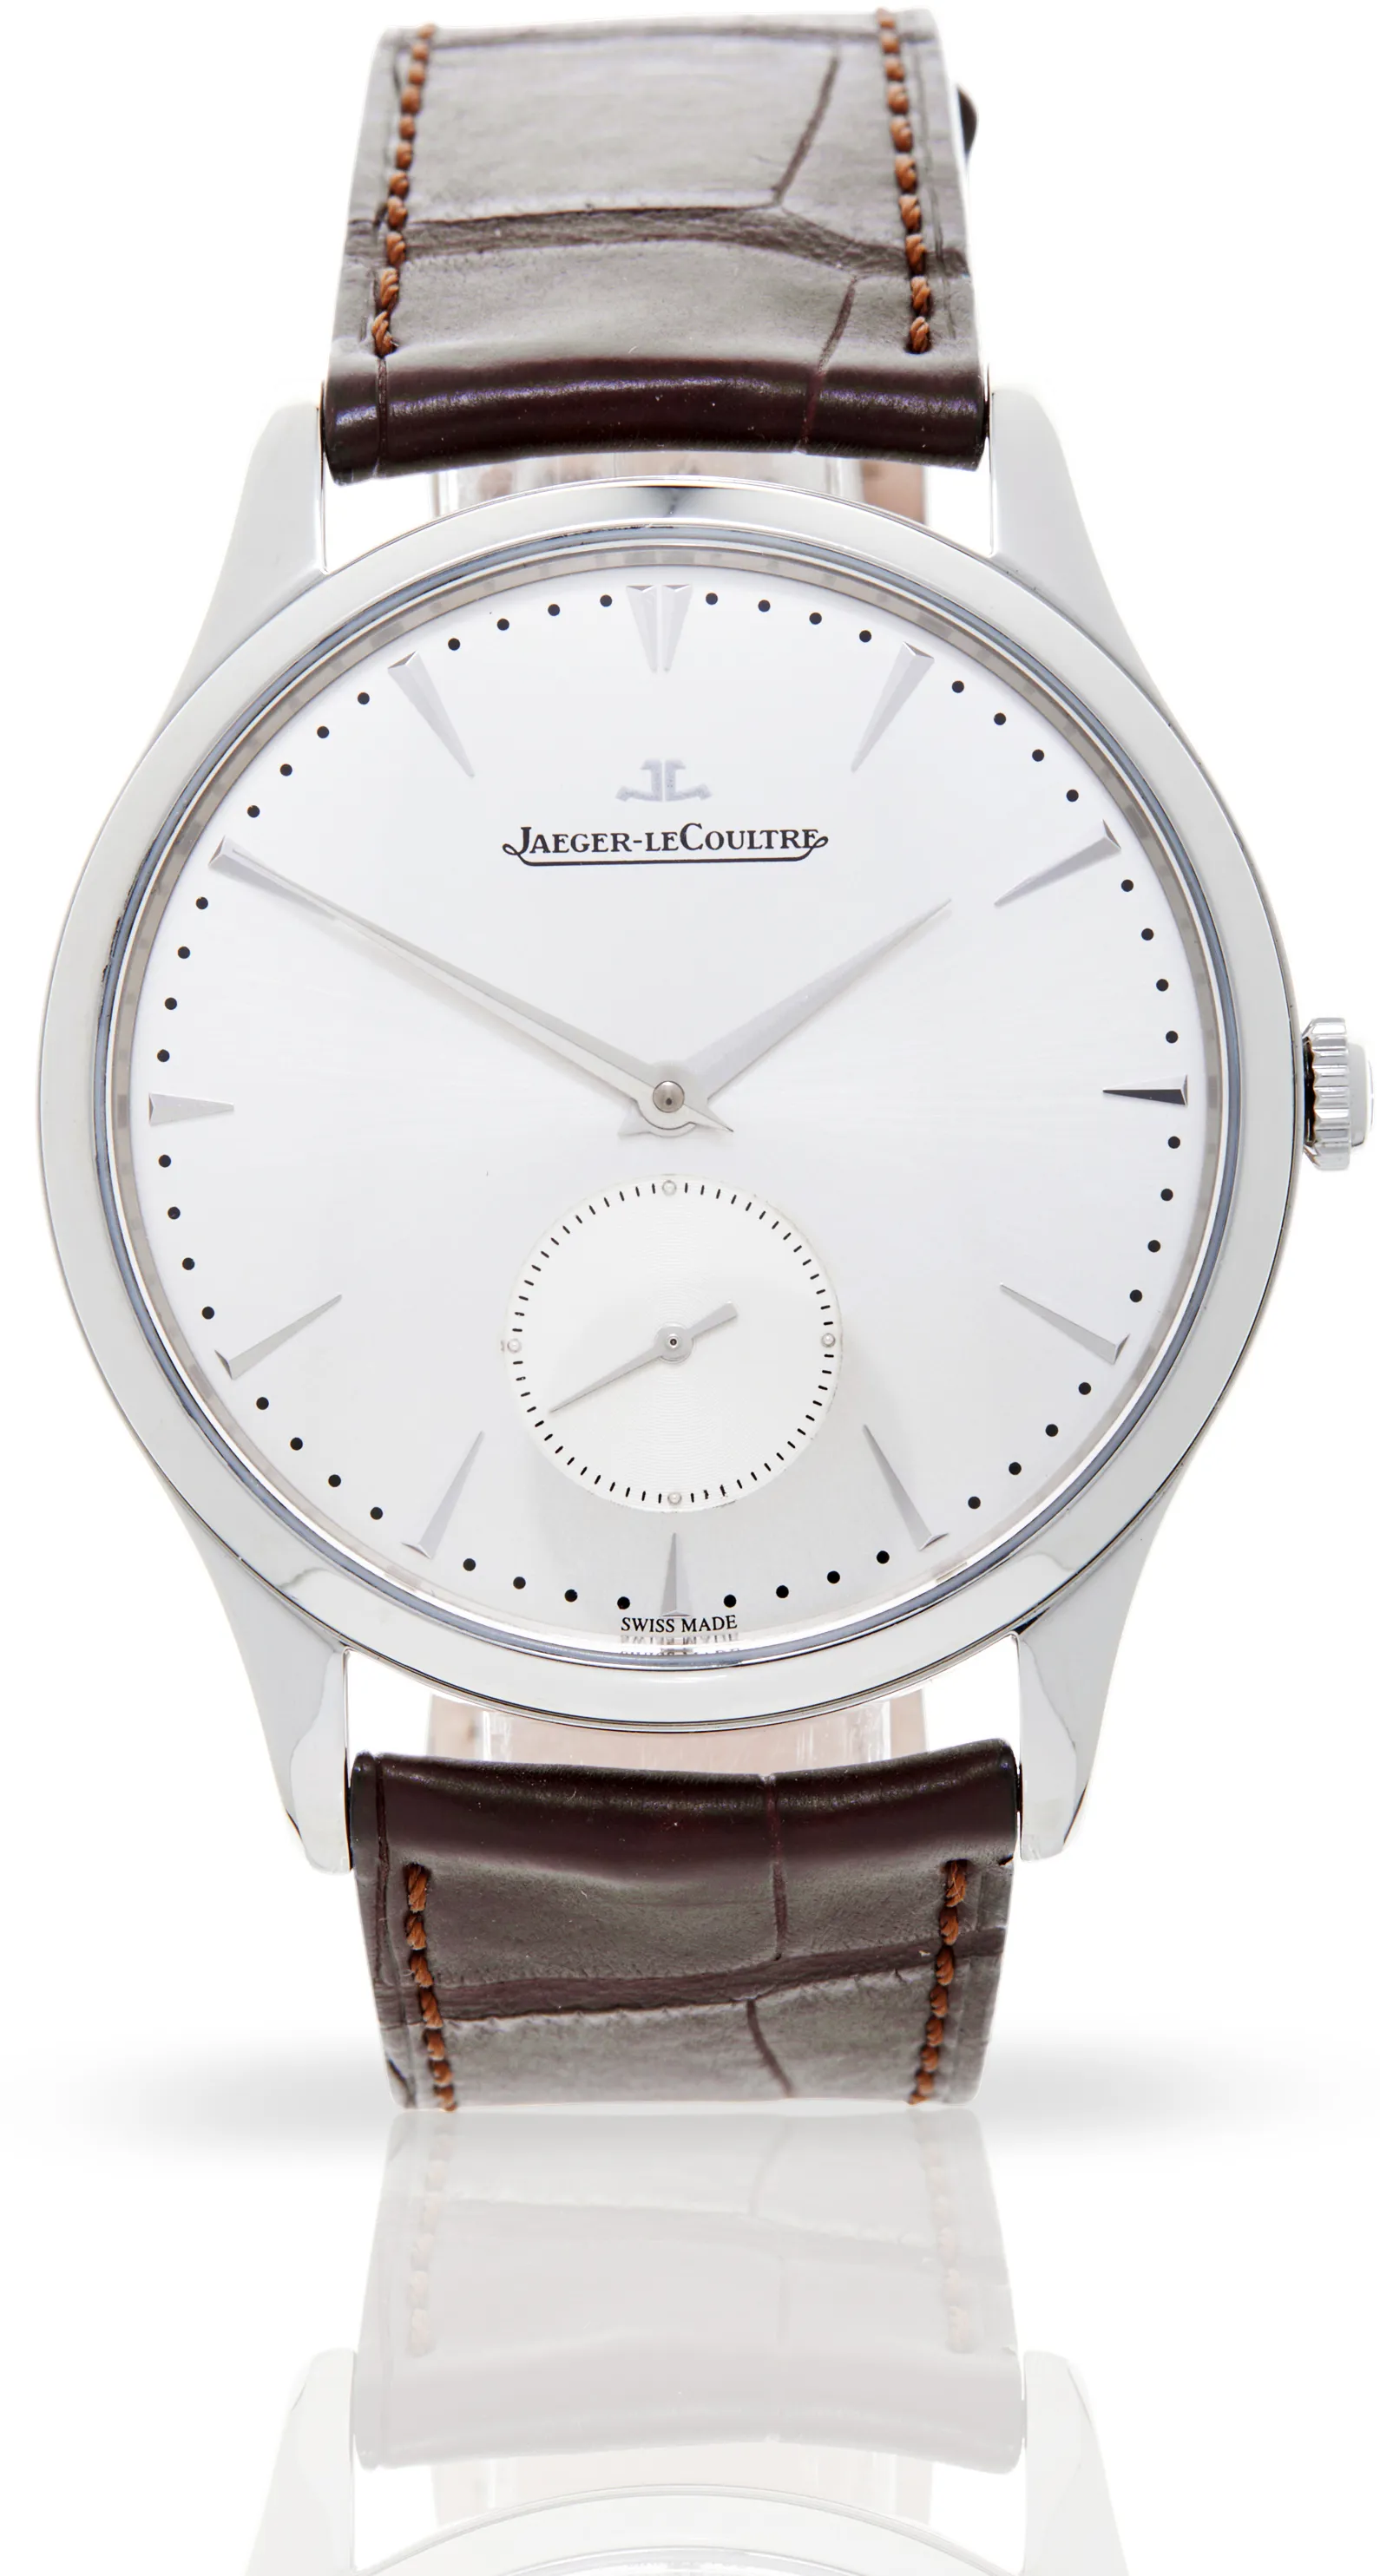 Jaeger-LeCoultre Master Ultra Thin 1358420 40mm Stainless steel